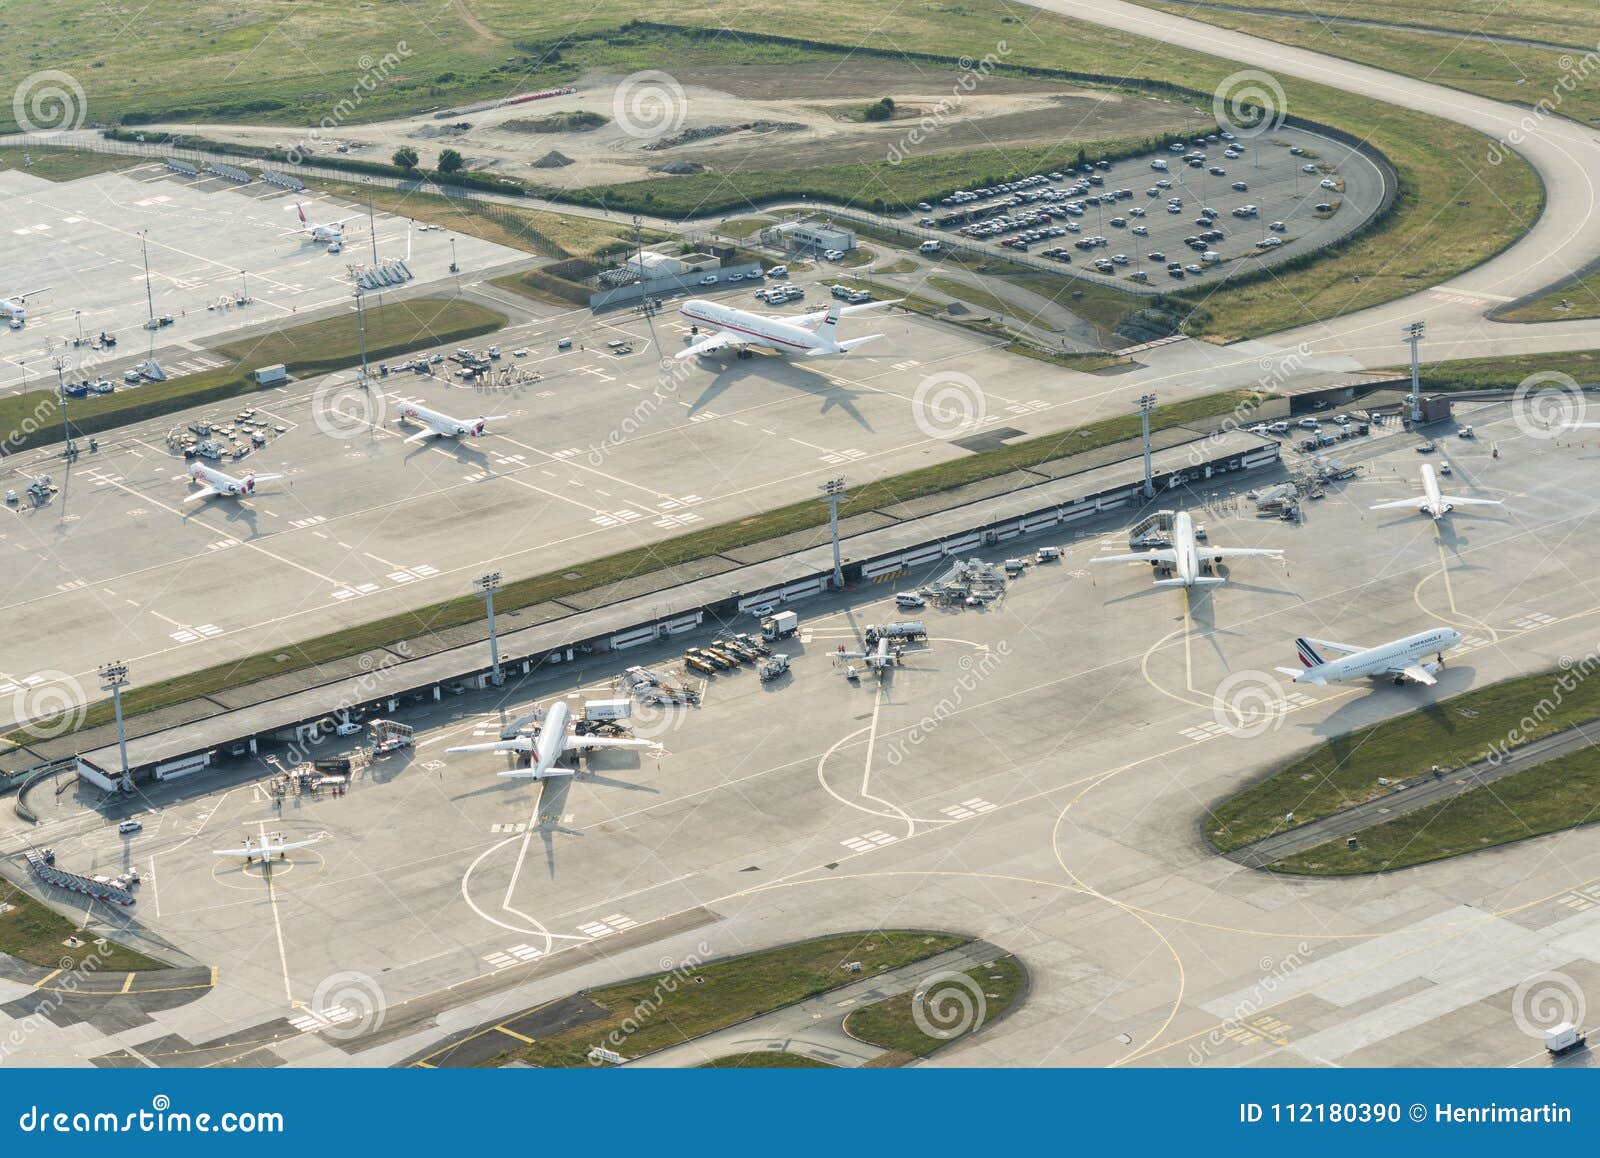 aerial image of planes at terminals at orly airport